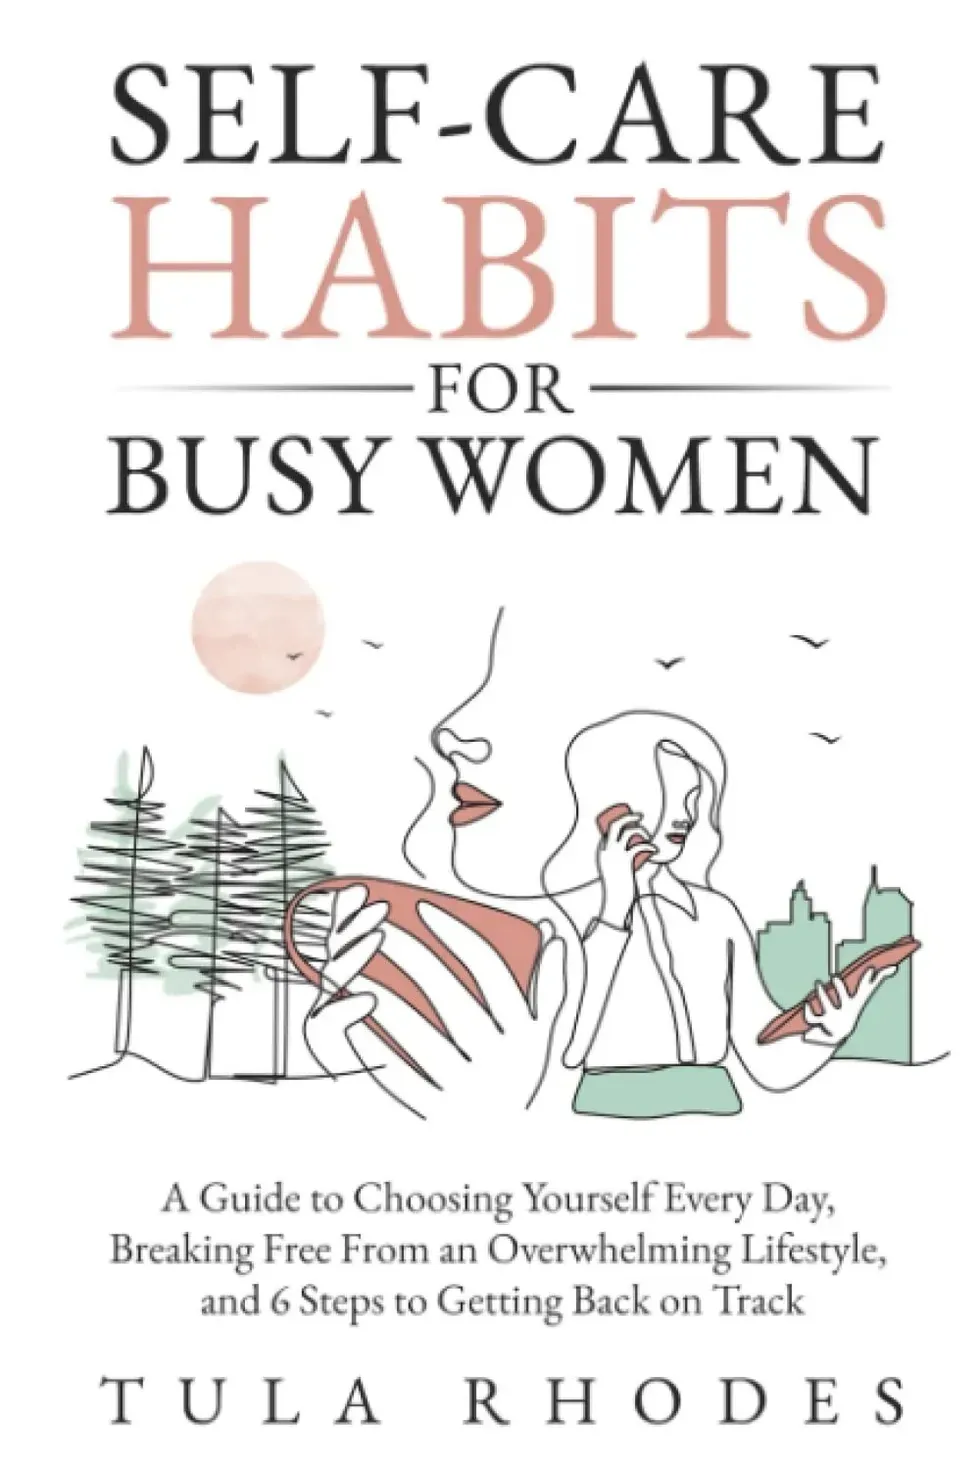 Self-Care Habits for Busy Women